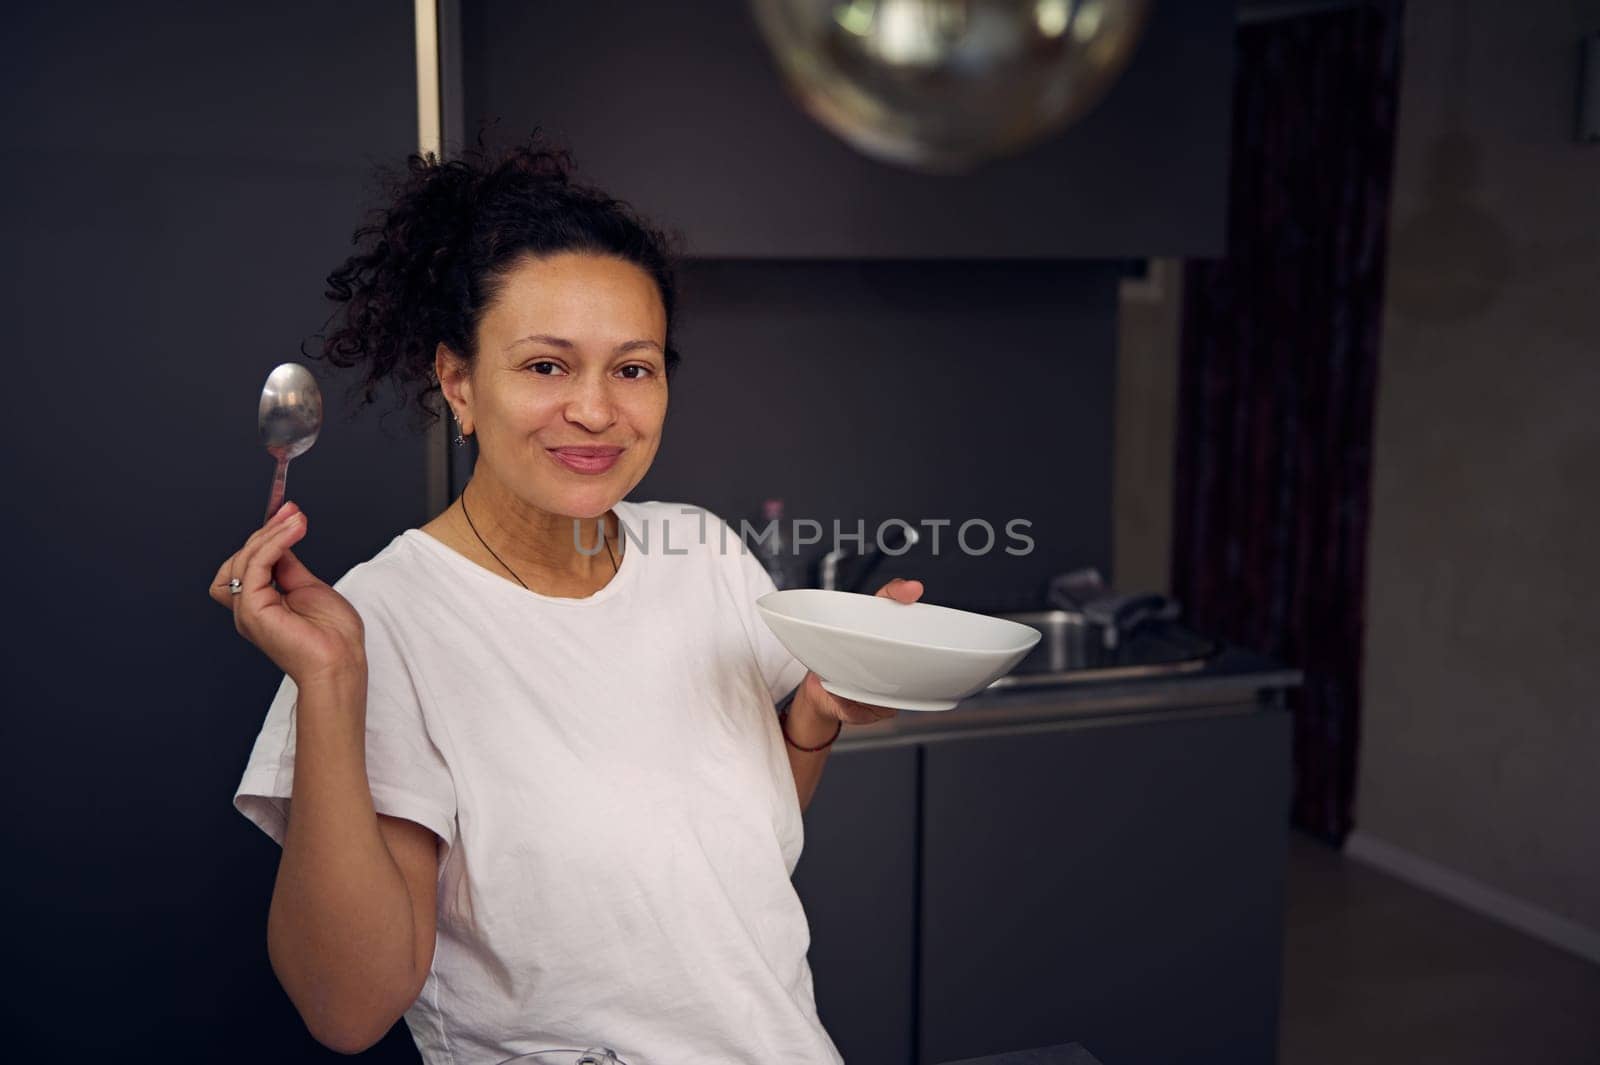 Beautiful curly haired brunette, young woman in pajamas, standing at home kitchen interior, smiling looking at camera, enjoying her healthy oat flakes for breakfast in the morning. People. Lifestyle